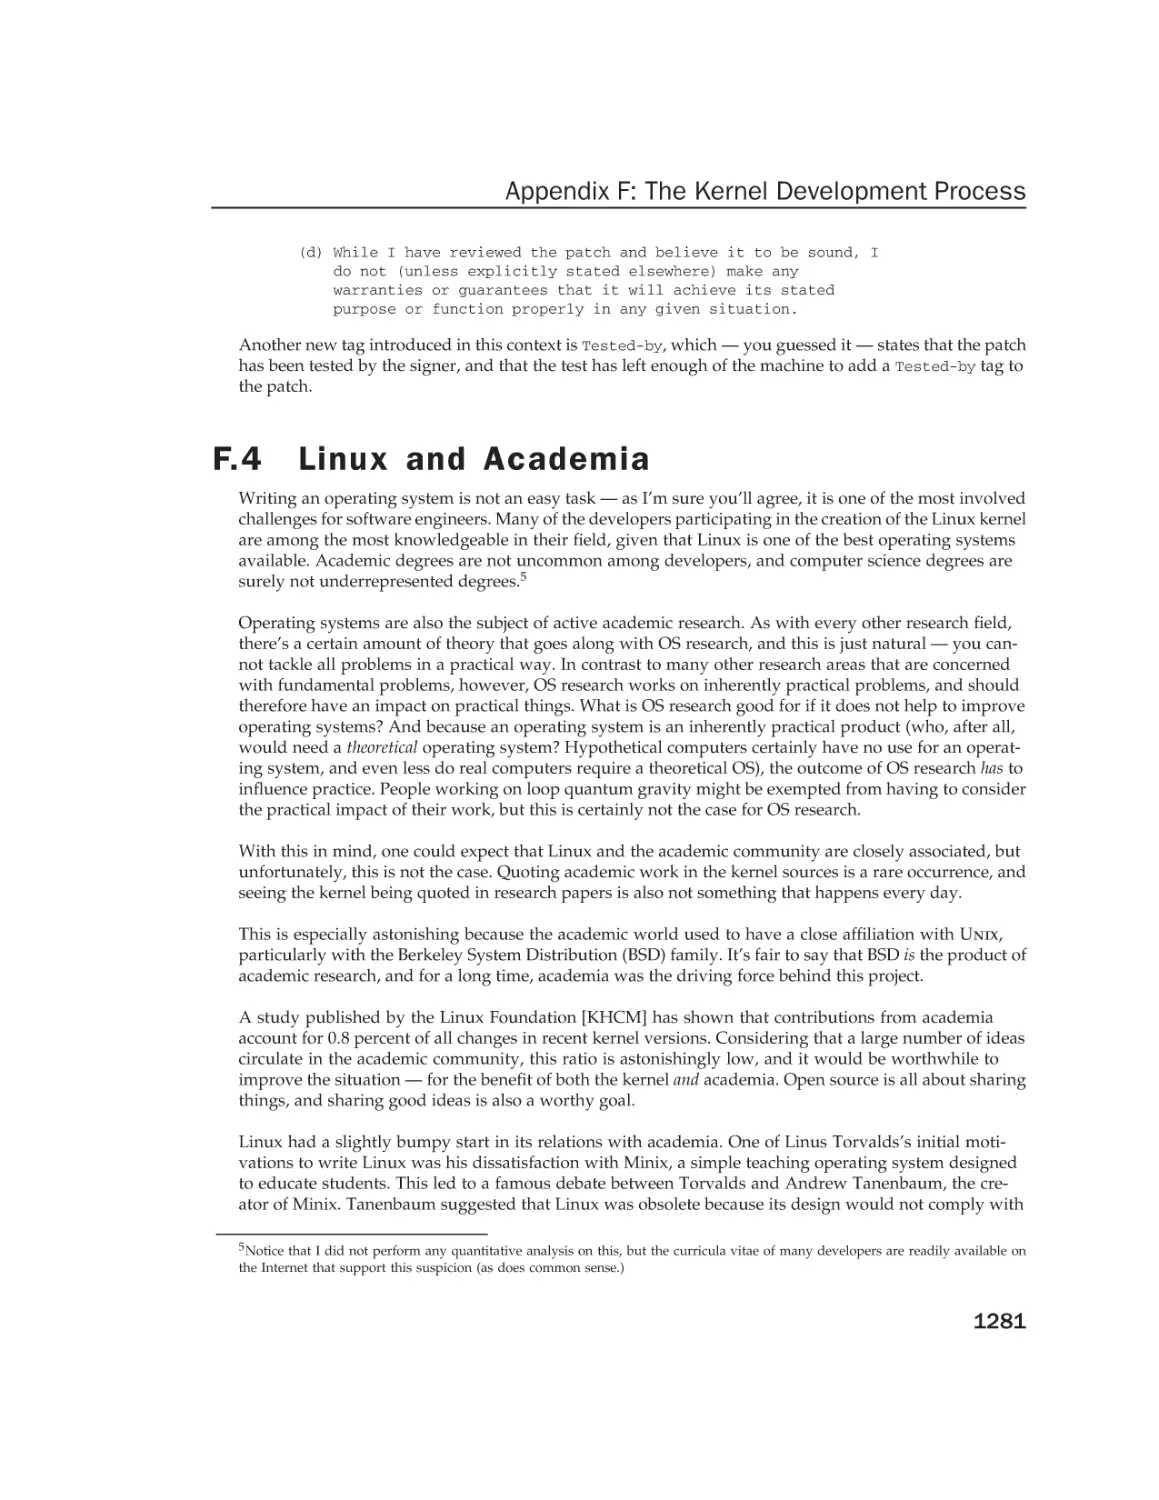 F.4 Linux and Academia